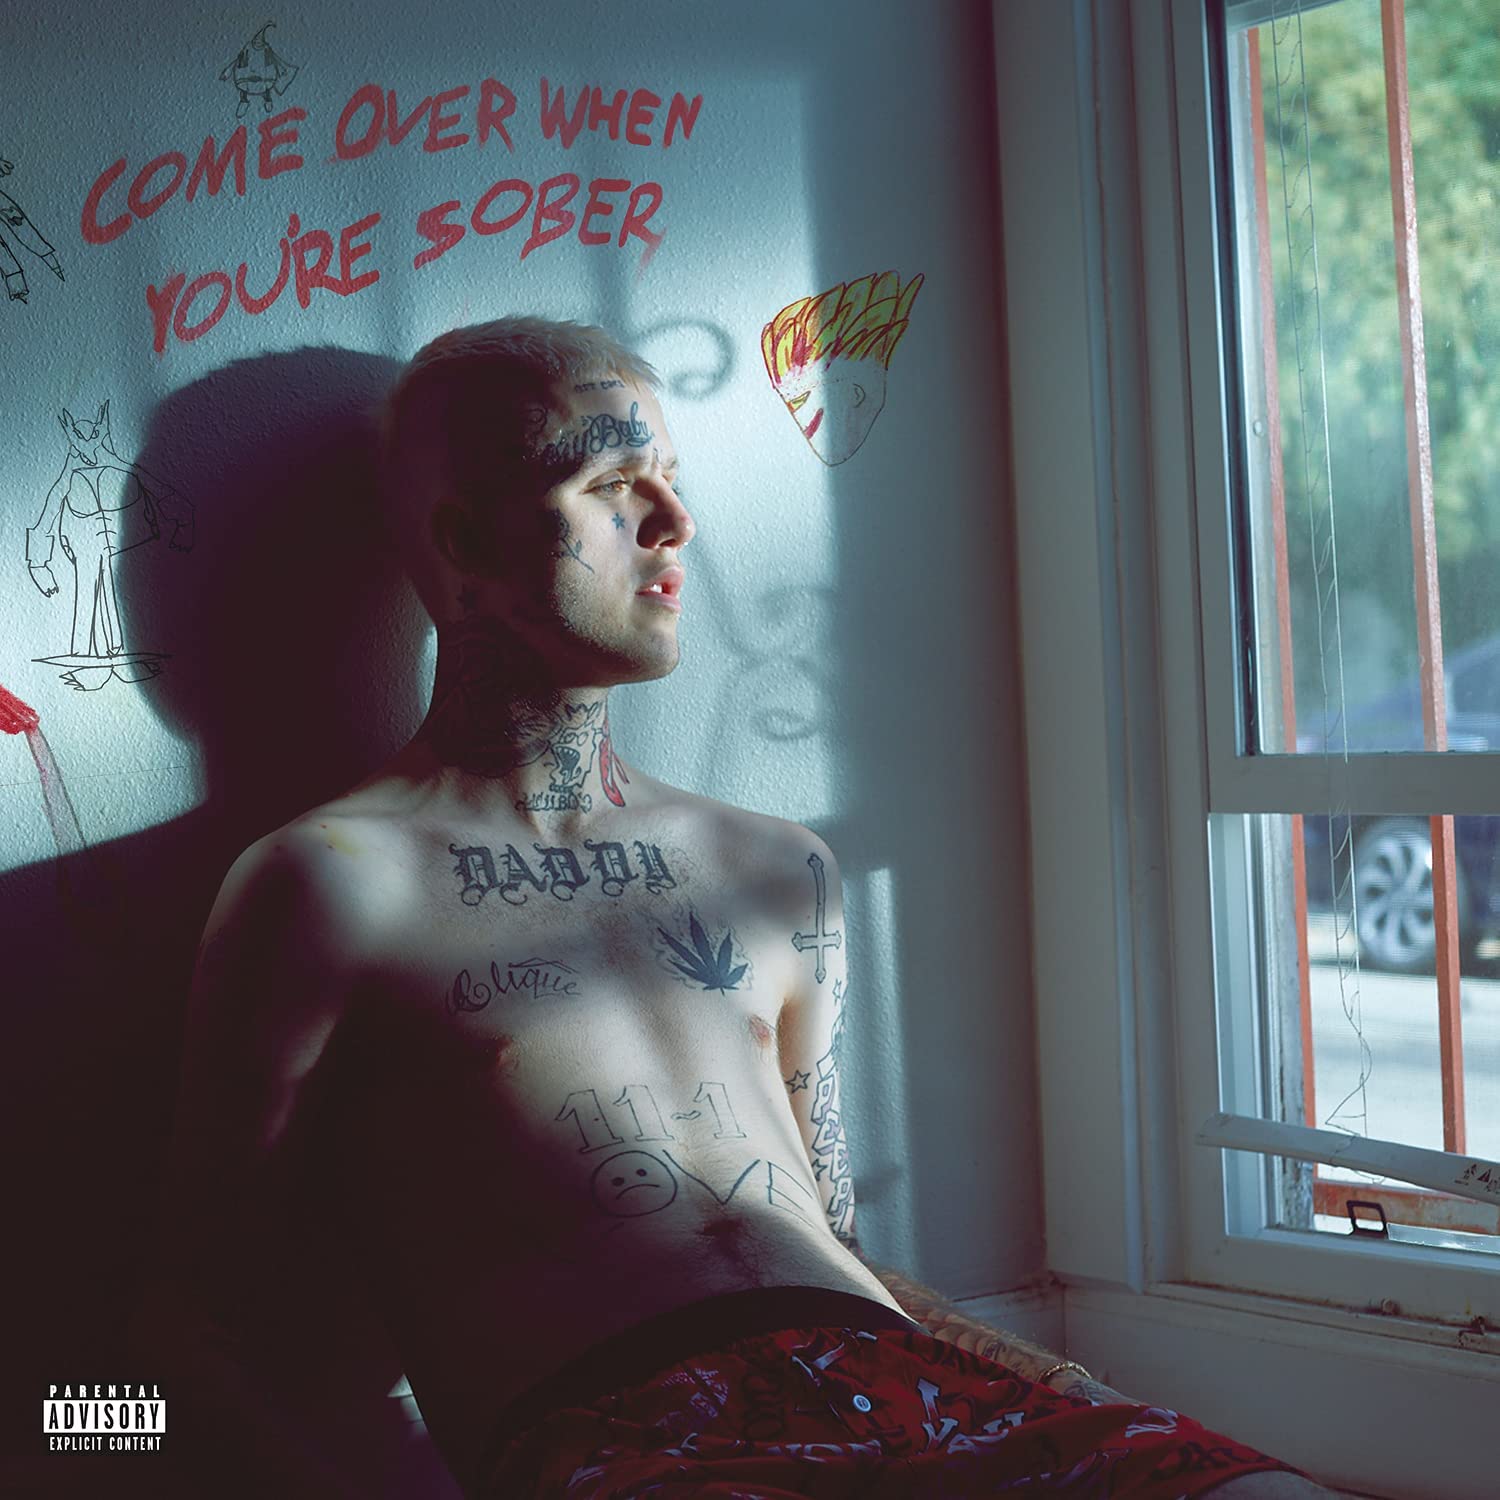 Double colored vinyl LP pressing in gatefold jacket.  Come Over When You're Sober Pt. 2 is Lil Peep's second album, and the first posthumous long form album from the prolific artist The New York Times has described as "at the forefront of bridging hip-hop